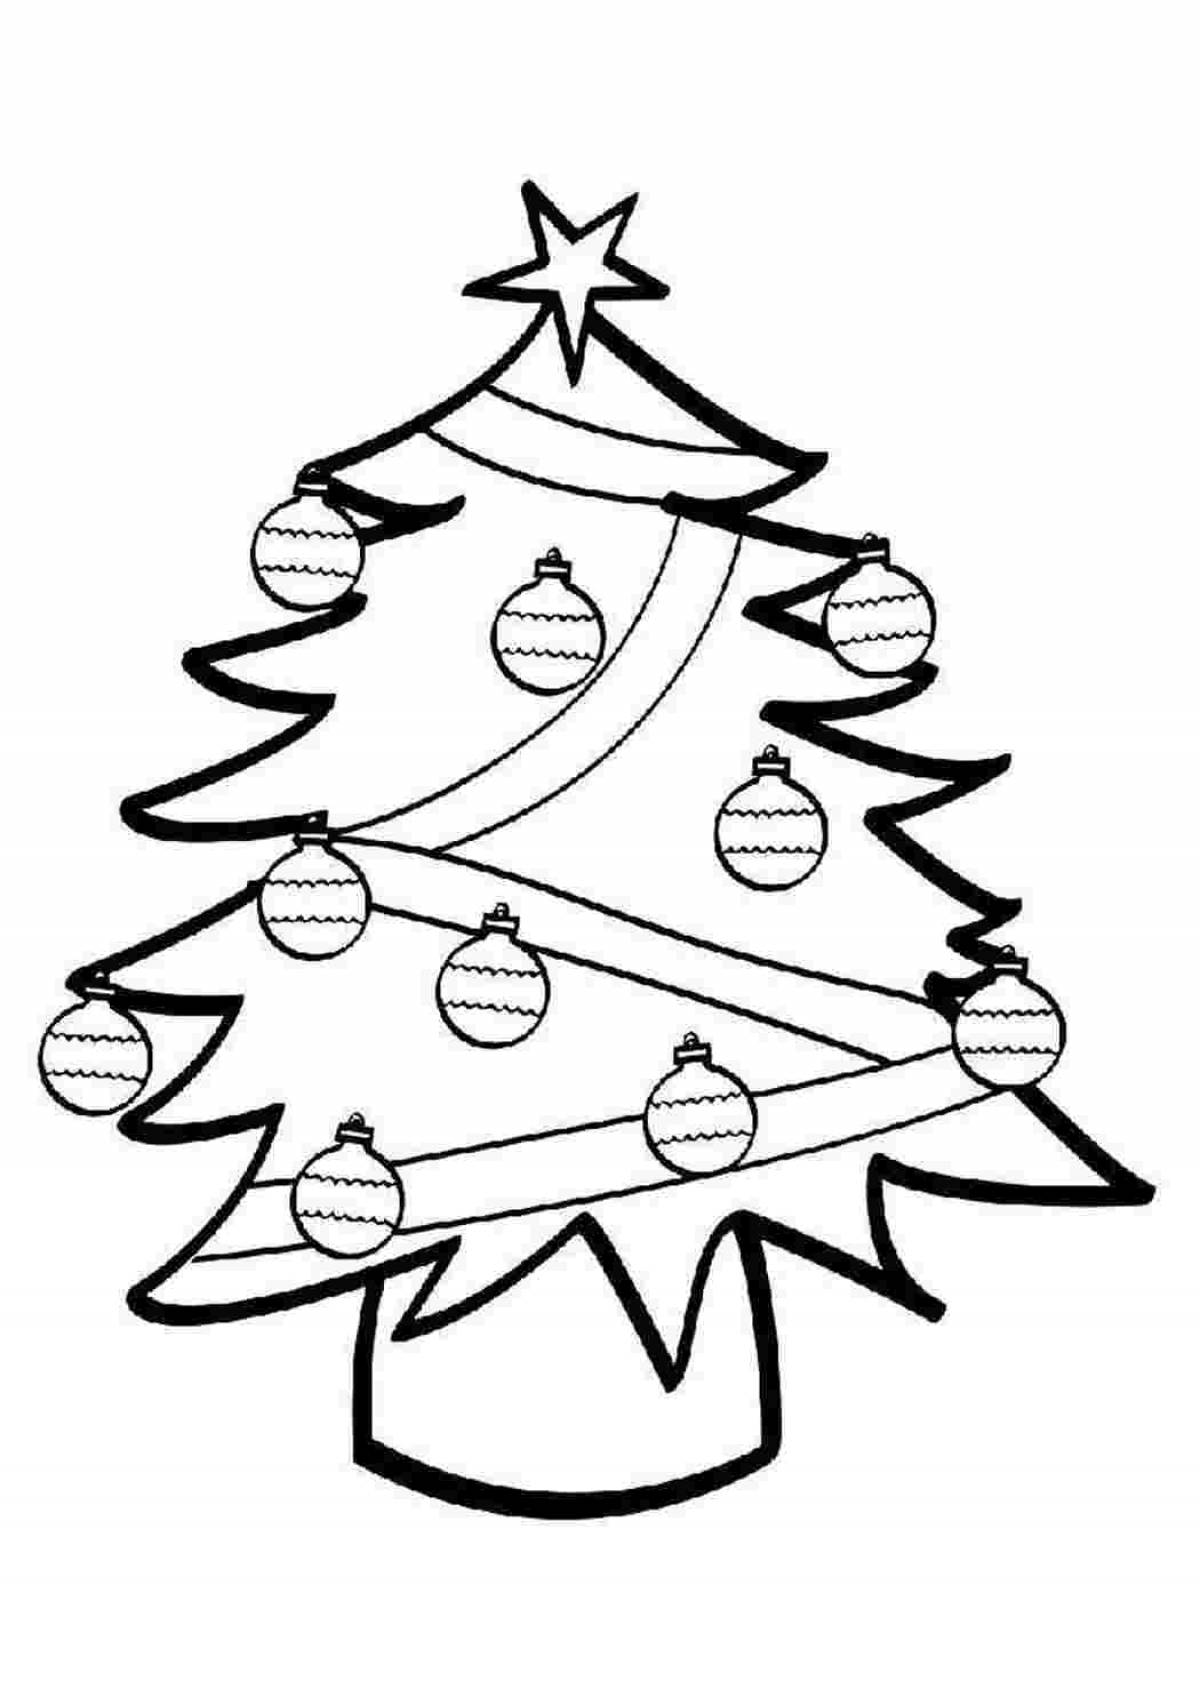 Christmas tree coloring book for 3-4 year olds